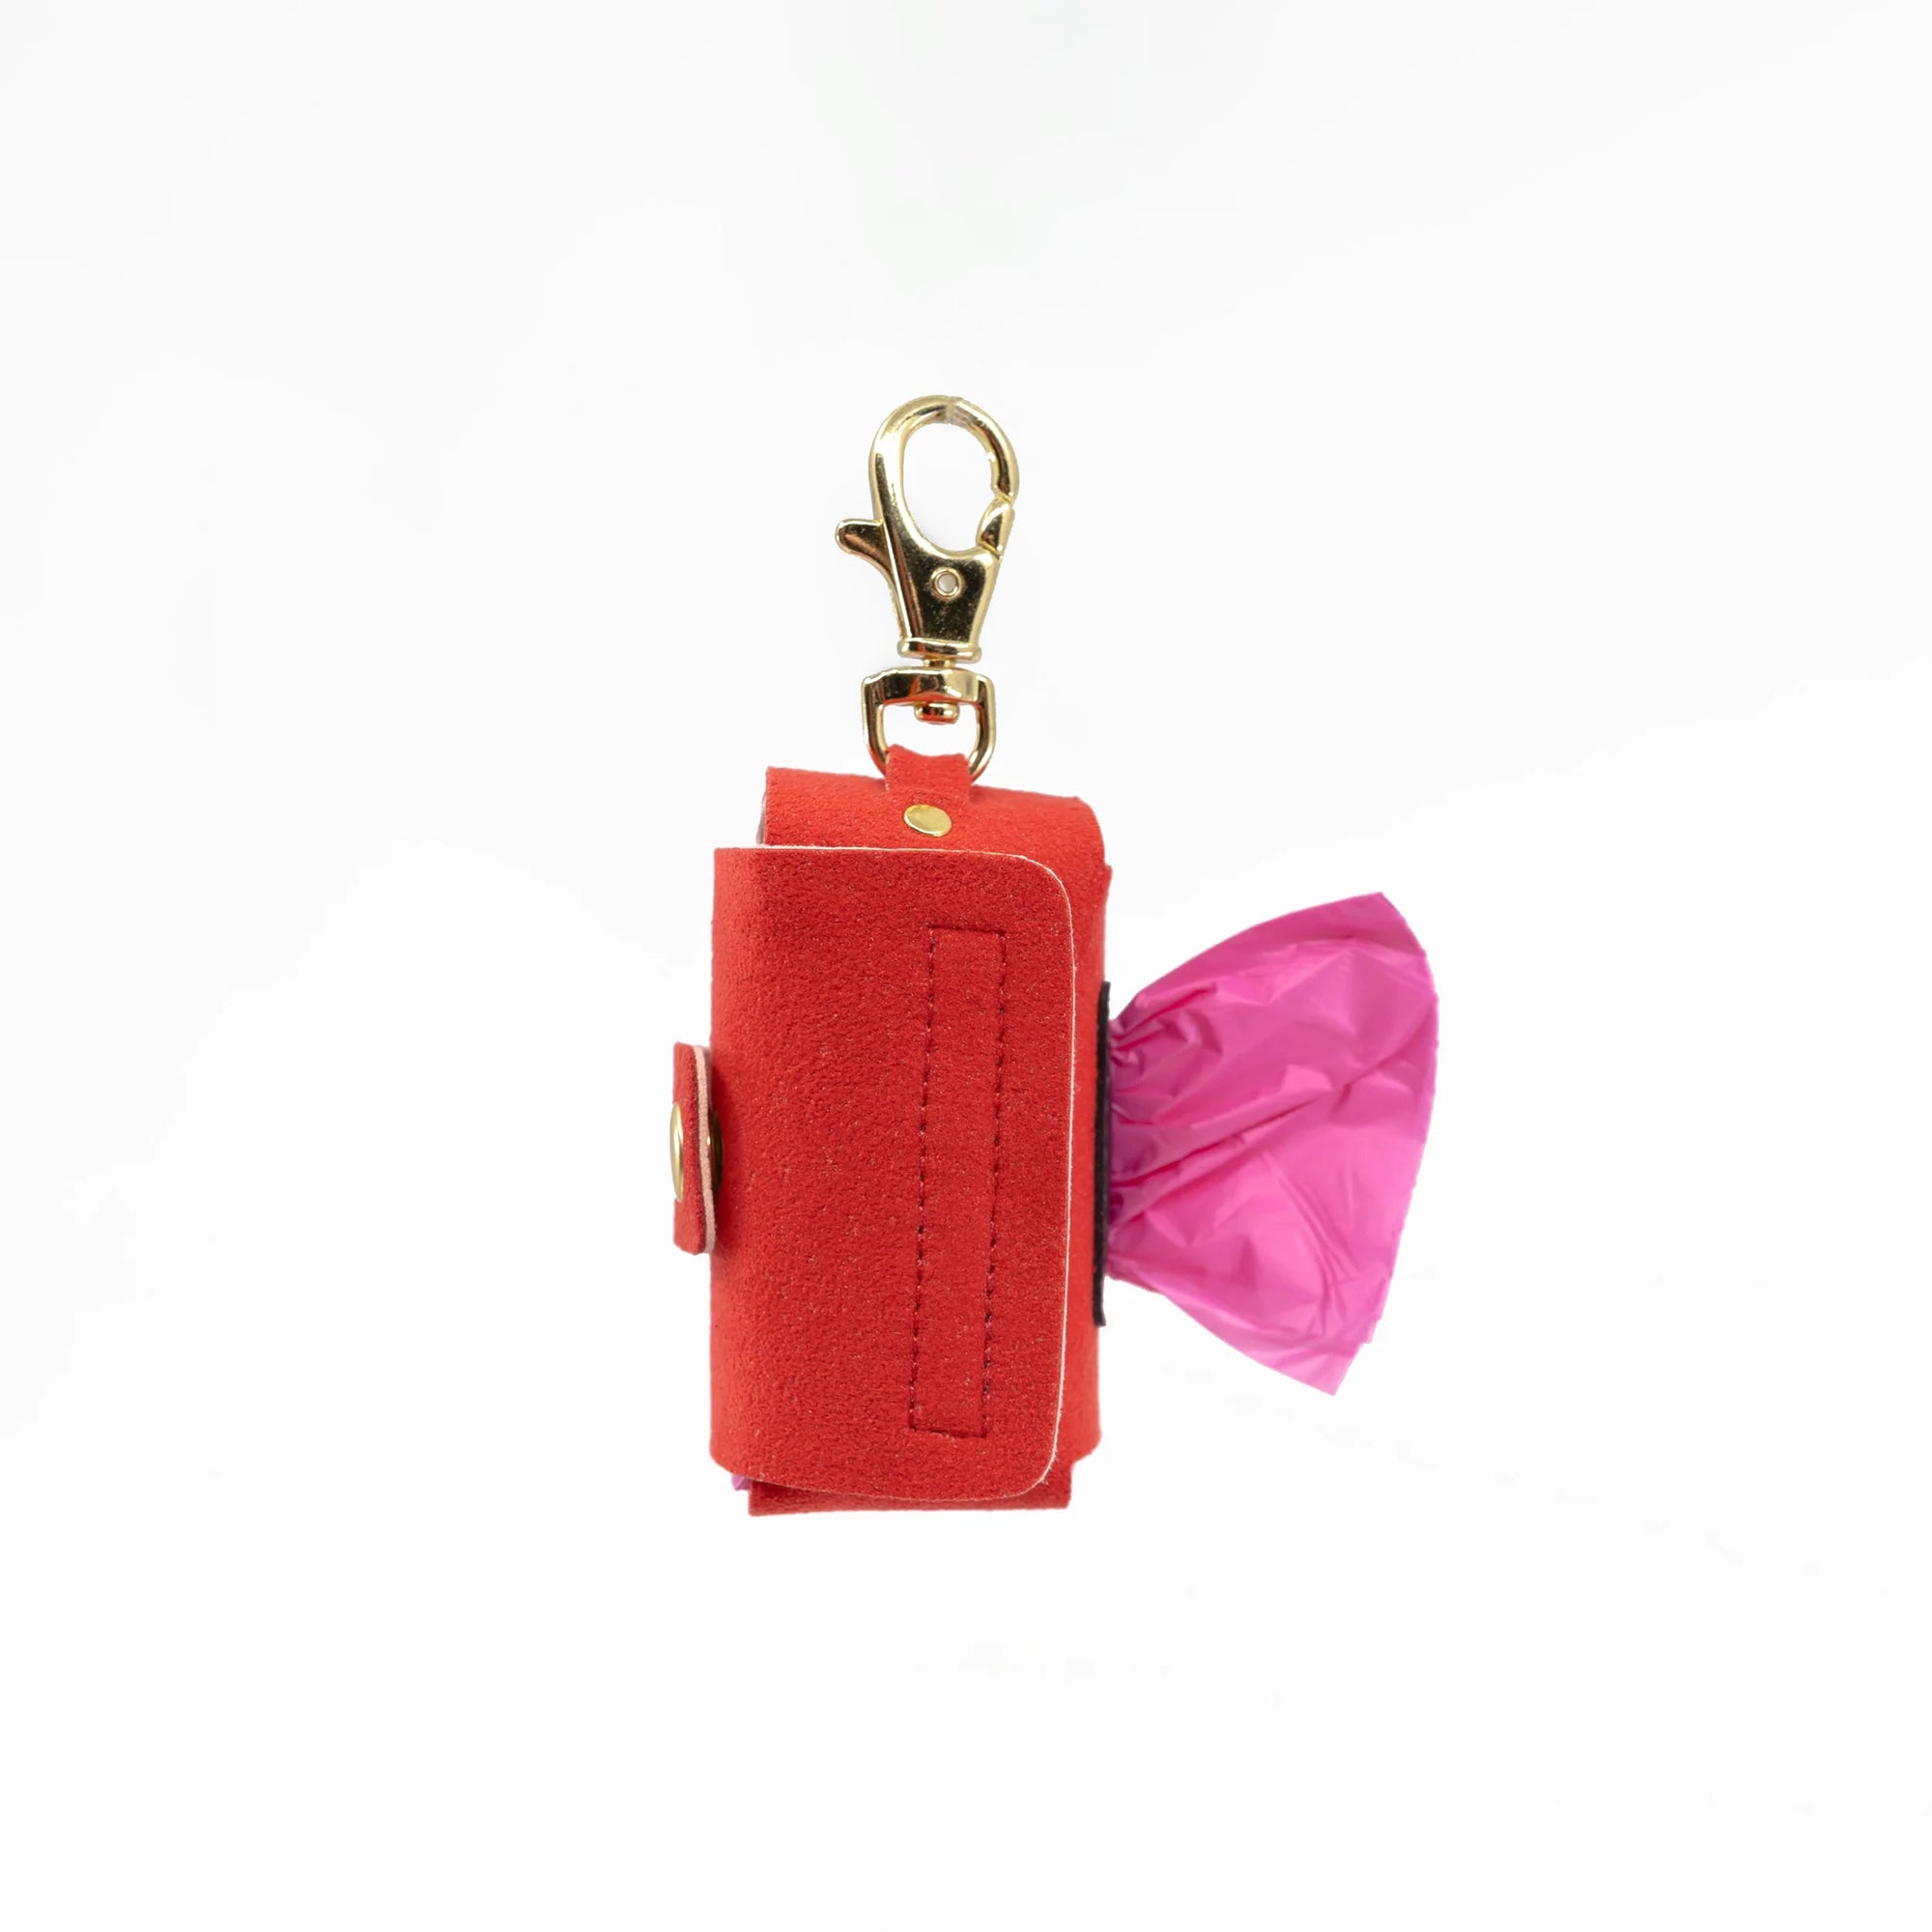 The photo showcases a red dog poop bag holder with a roll of pink bags, equipped with a gold clip for easy leash attachment. It's a part of "the furryfolks" product line, emphasizing convenience for dog owners during walks.